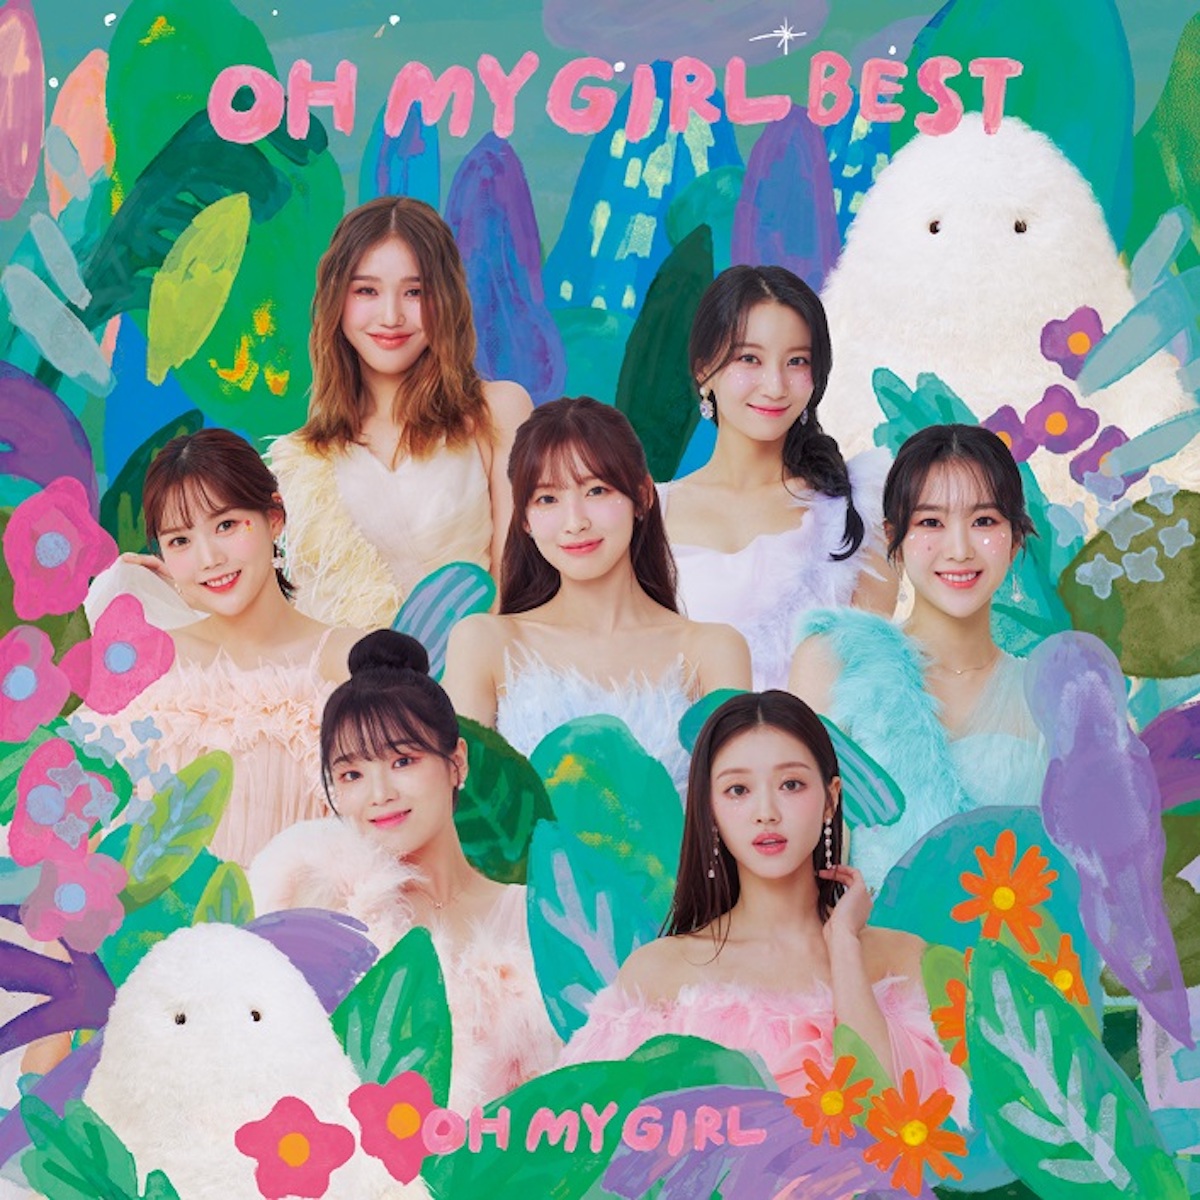 OH MY GIRL